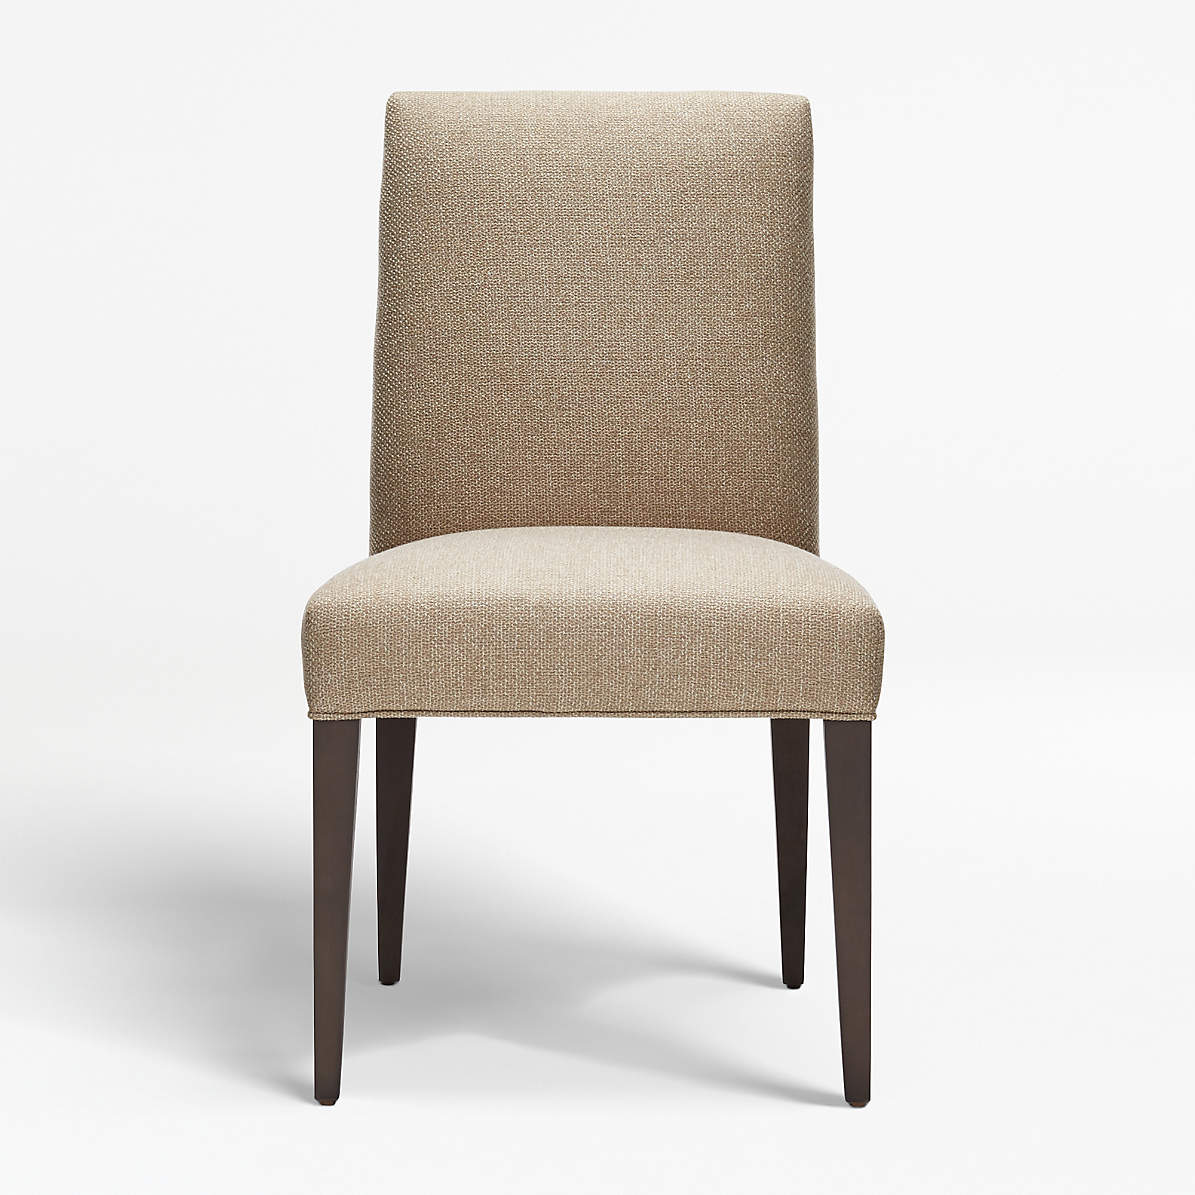 How do I choose an upholstered dining chair?